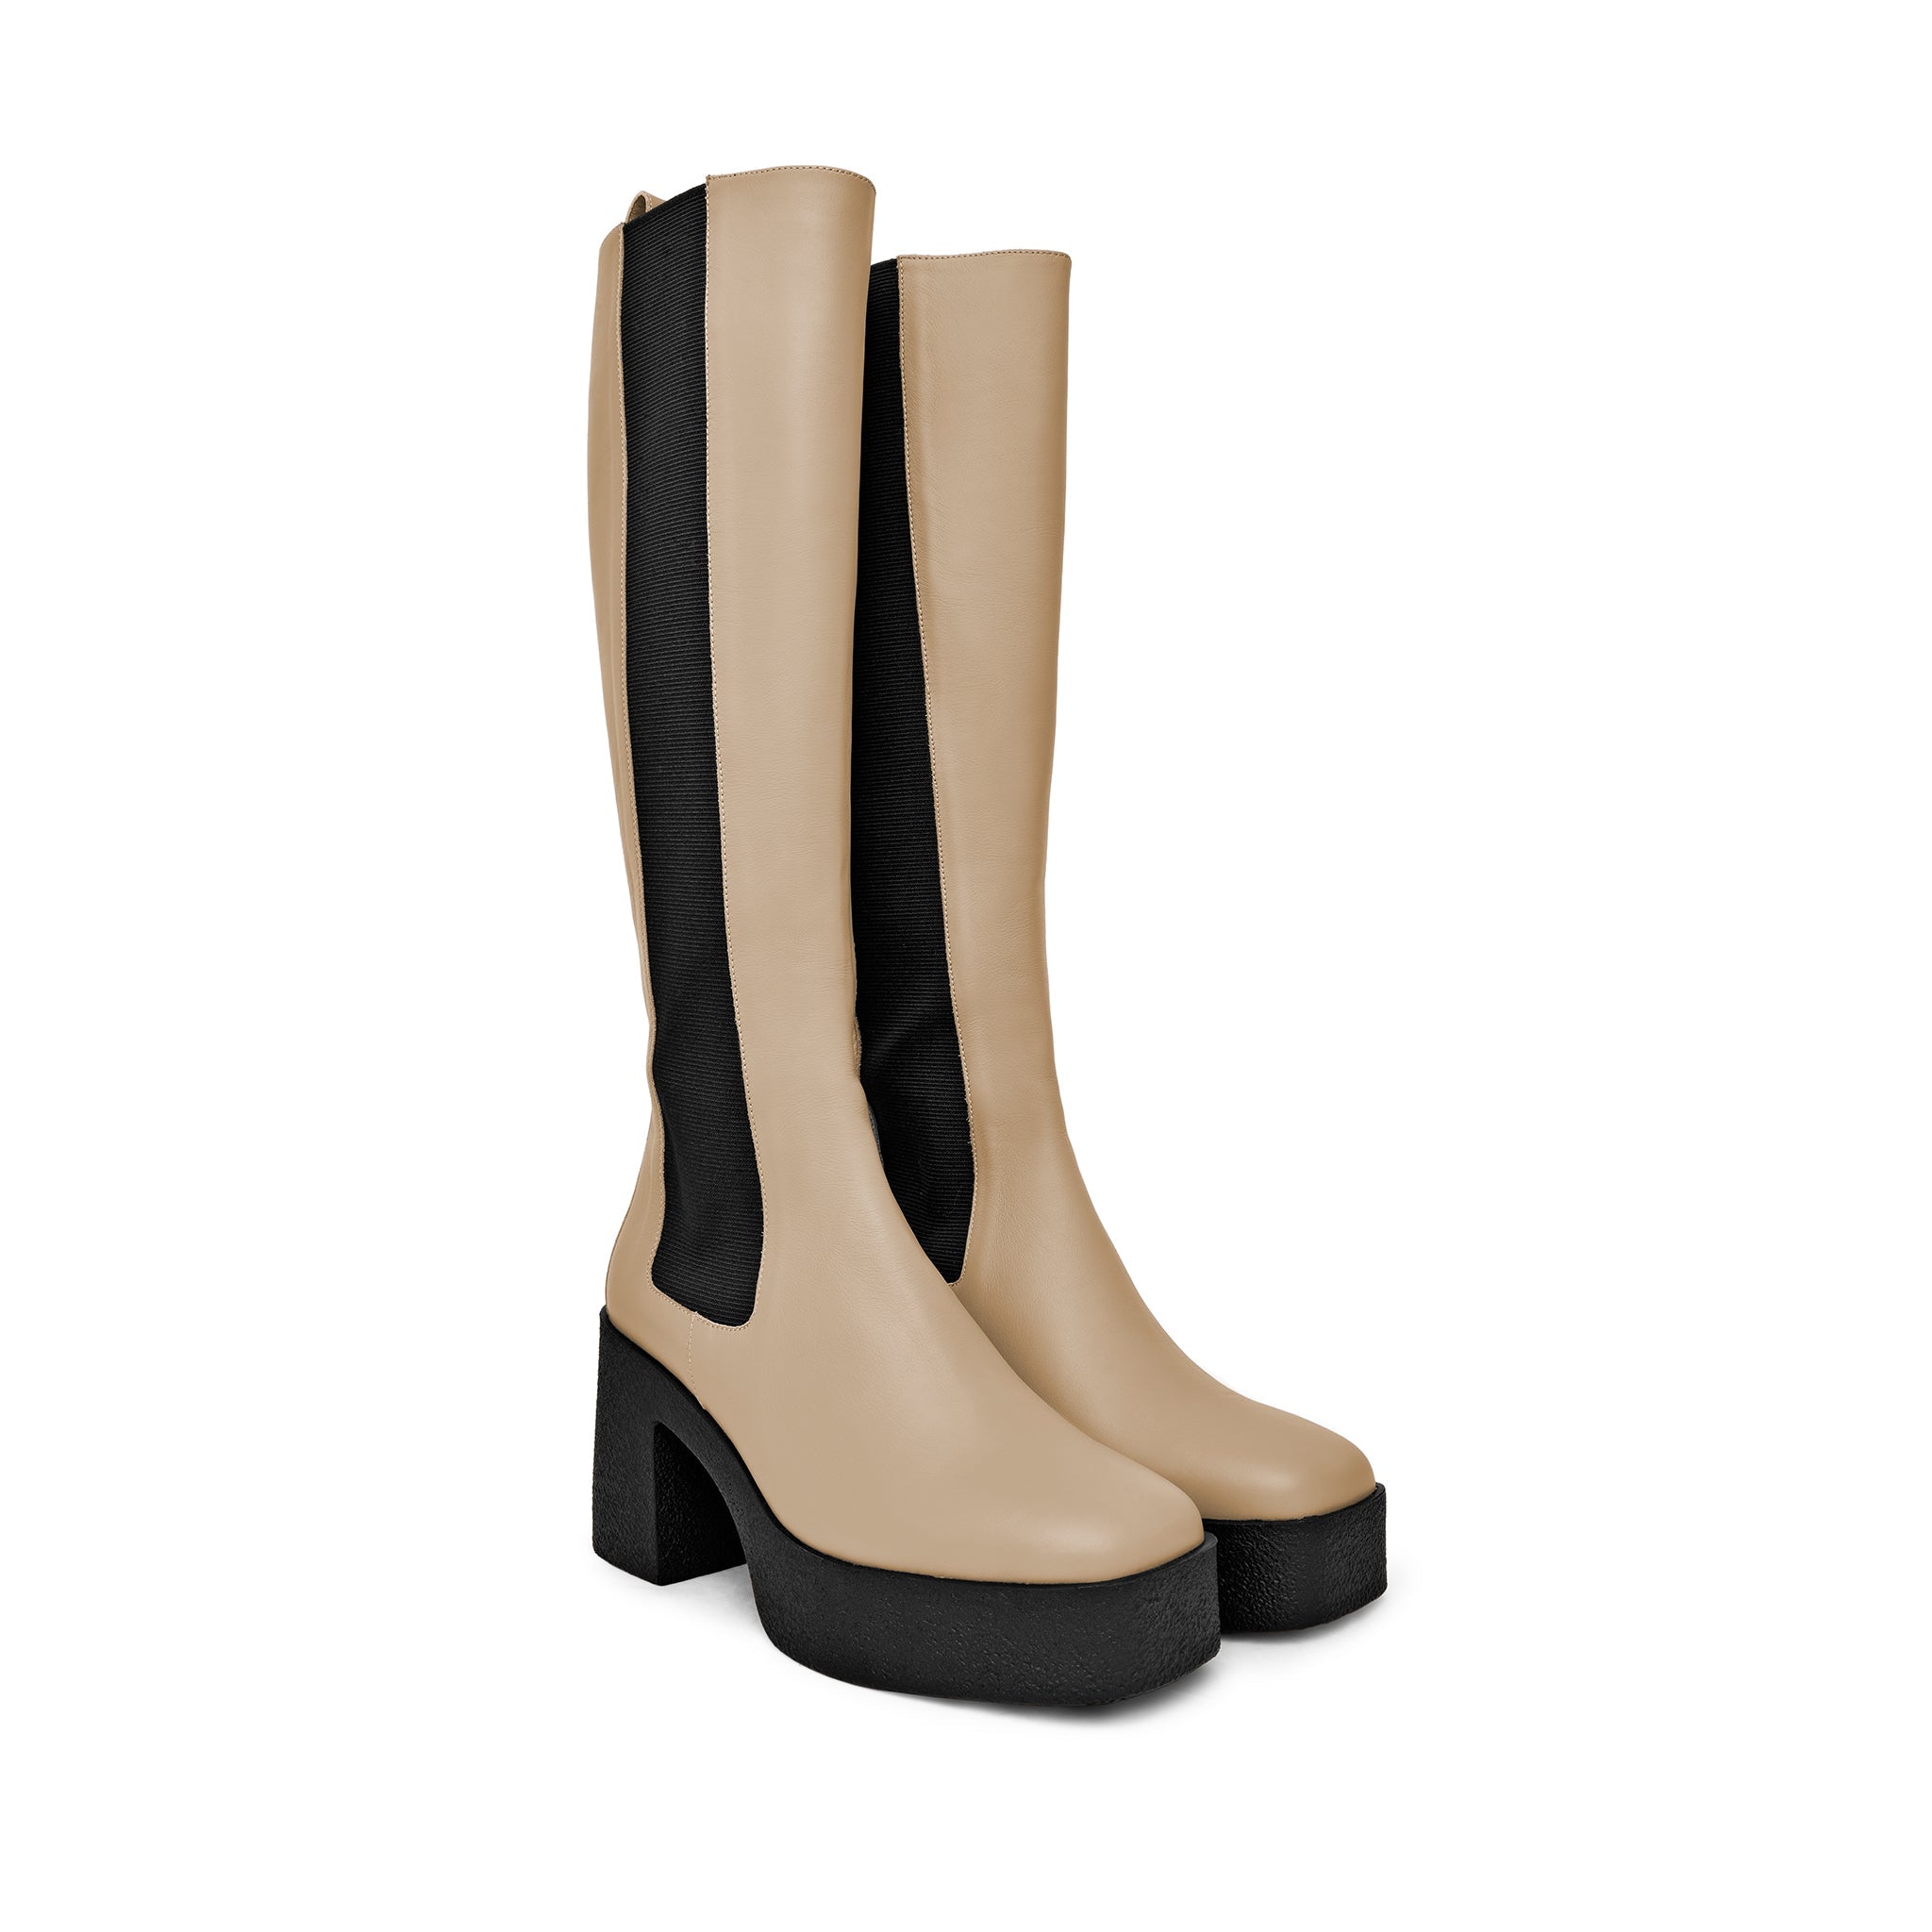 Momoko Taupe Knee-High Leather Chelsea Boots 20077-05-02 -10